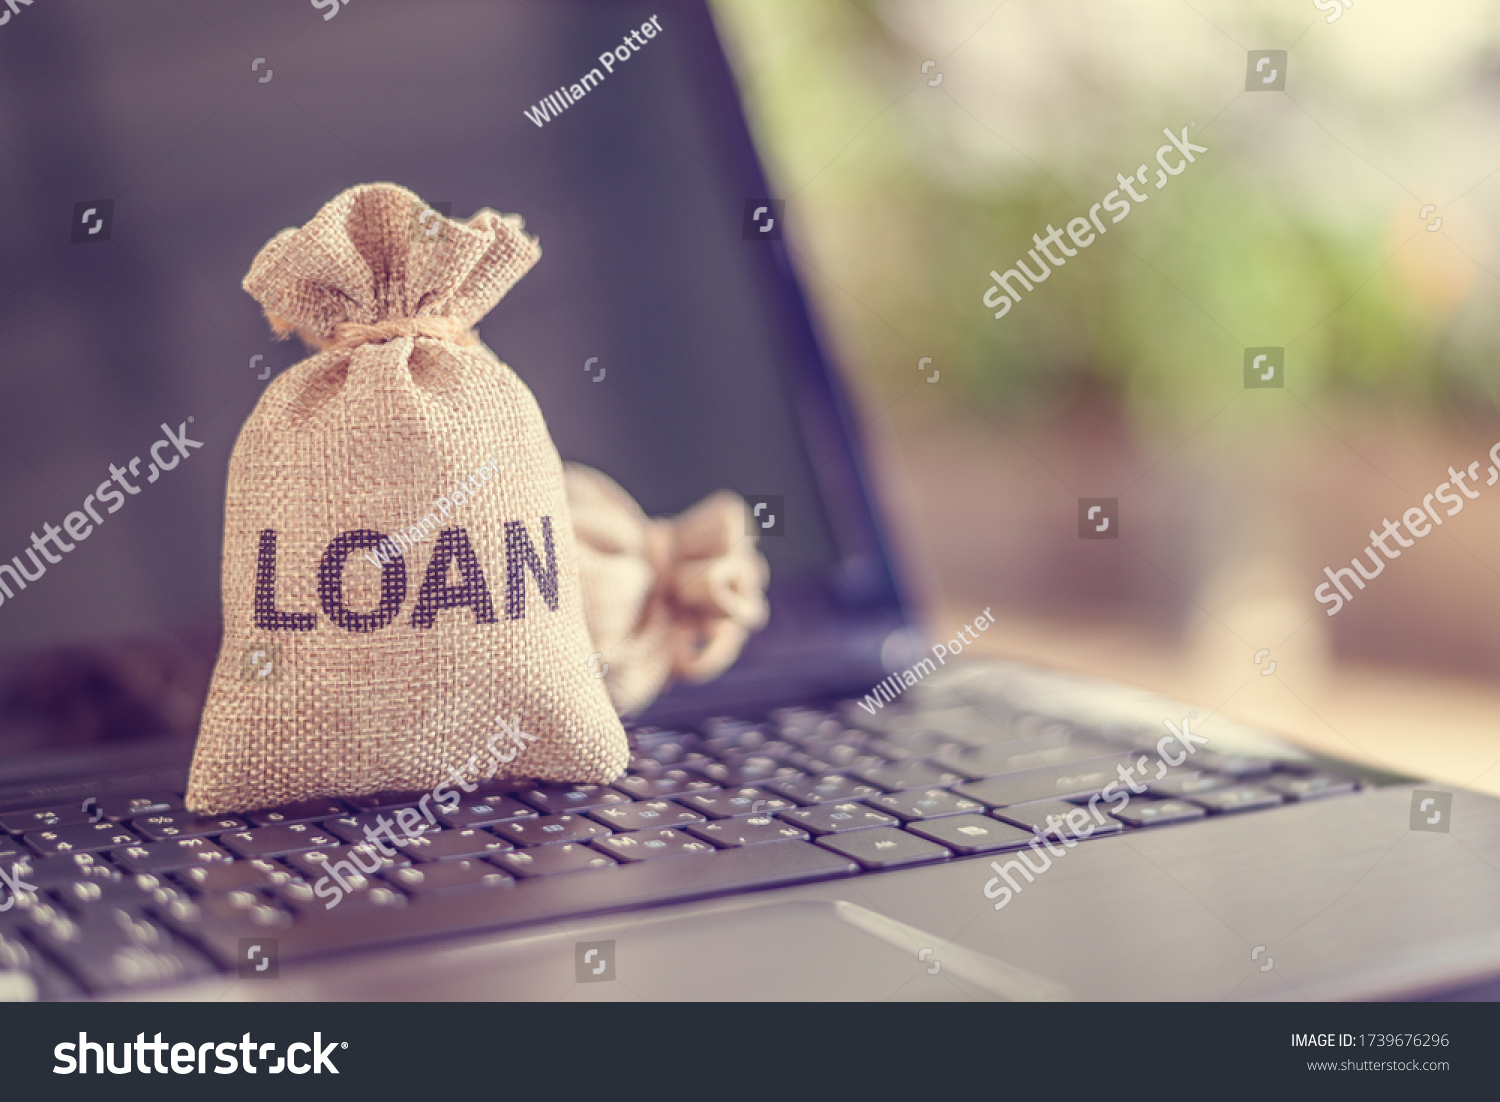 Online personal loan, financial concept : Loan bags on a laptop, depicting peer-to-peer lending, the practice of lending money to individual or business via online service among lenders and borrowers #1739676296